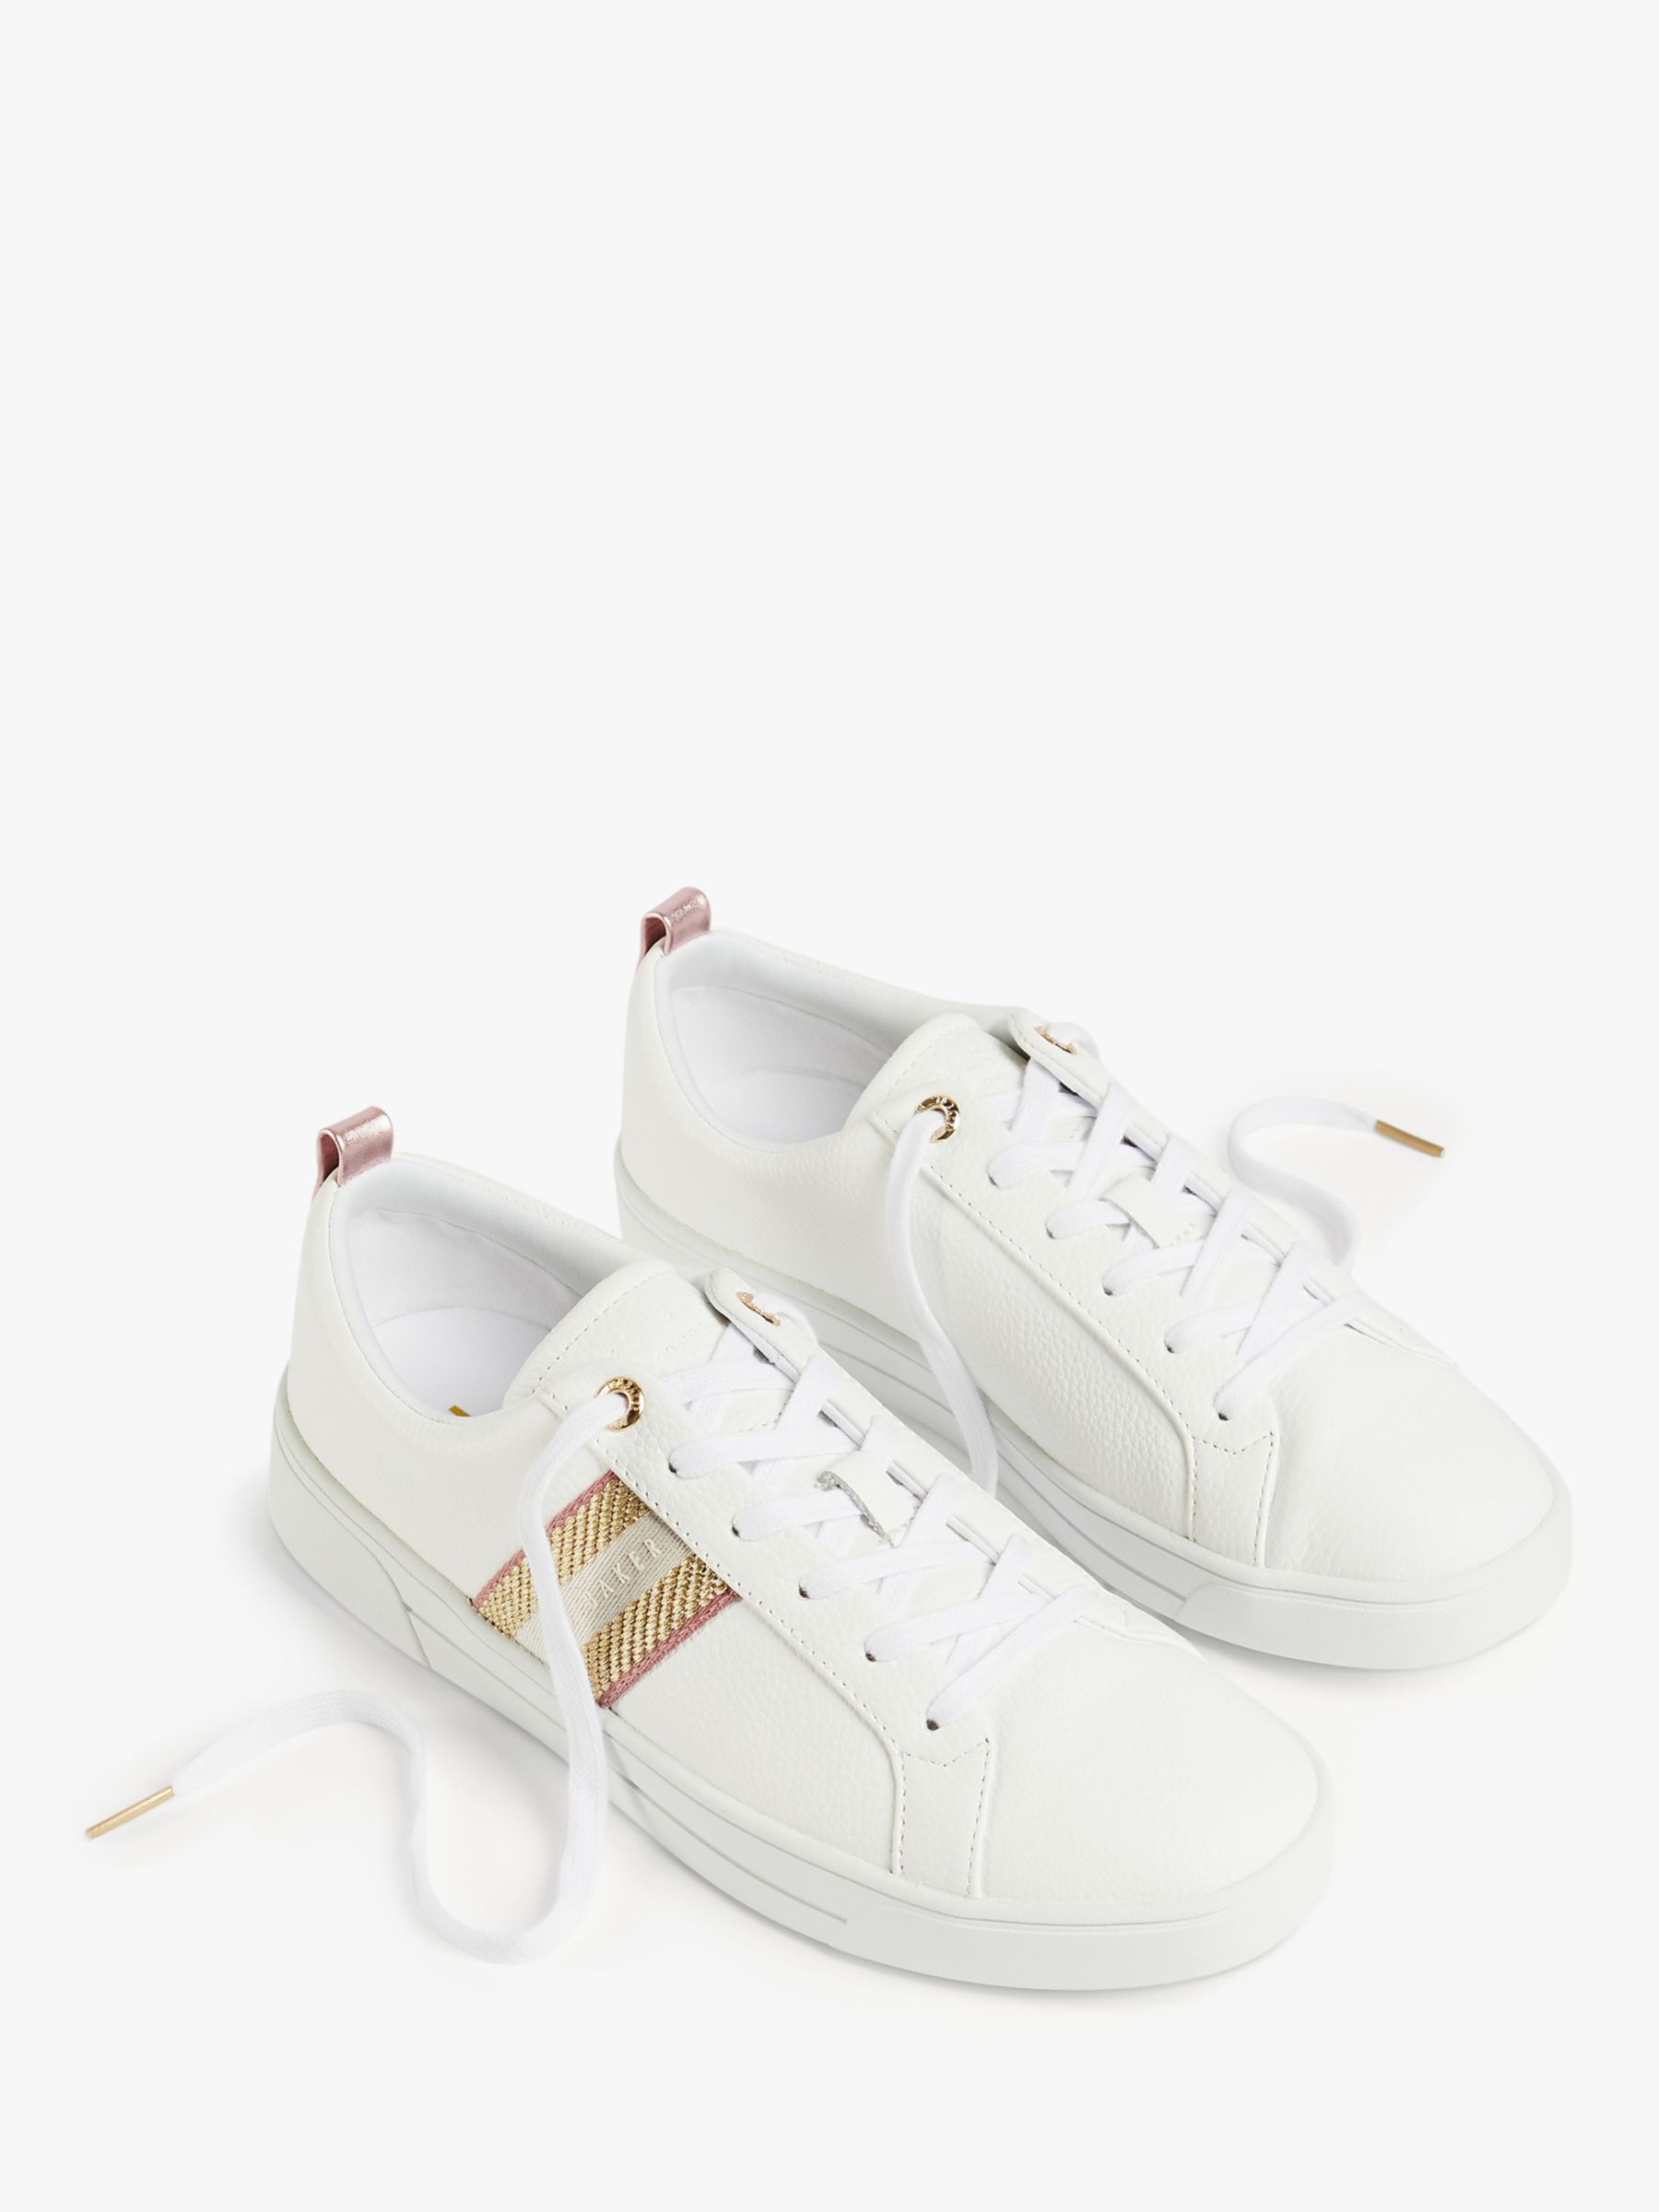 Ted Baker Baily Trainers, White/Metallic, 3